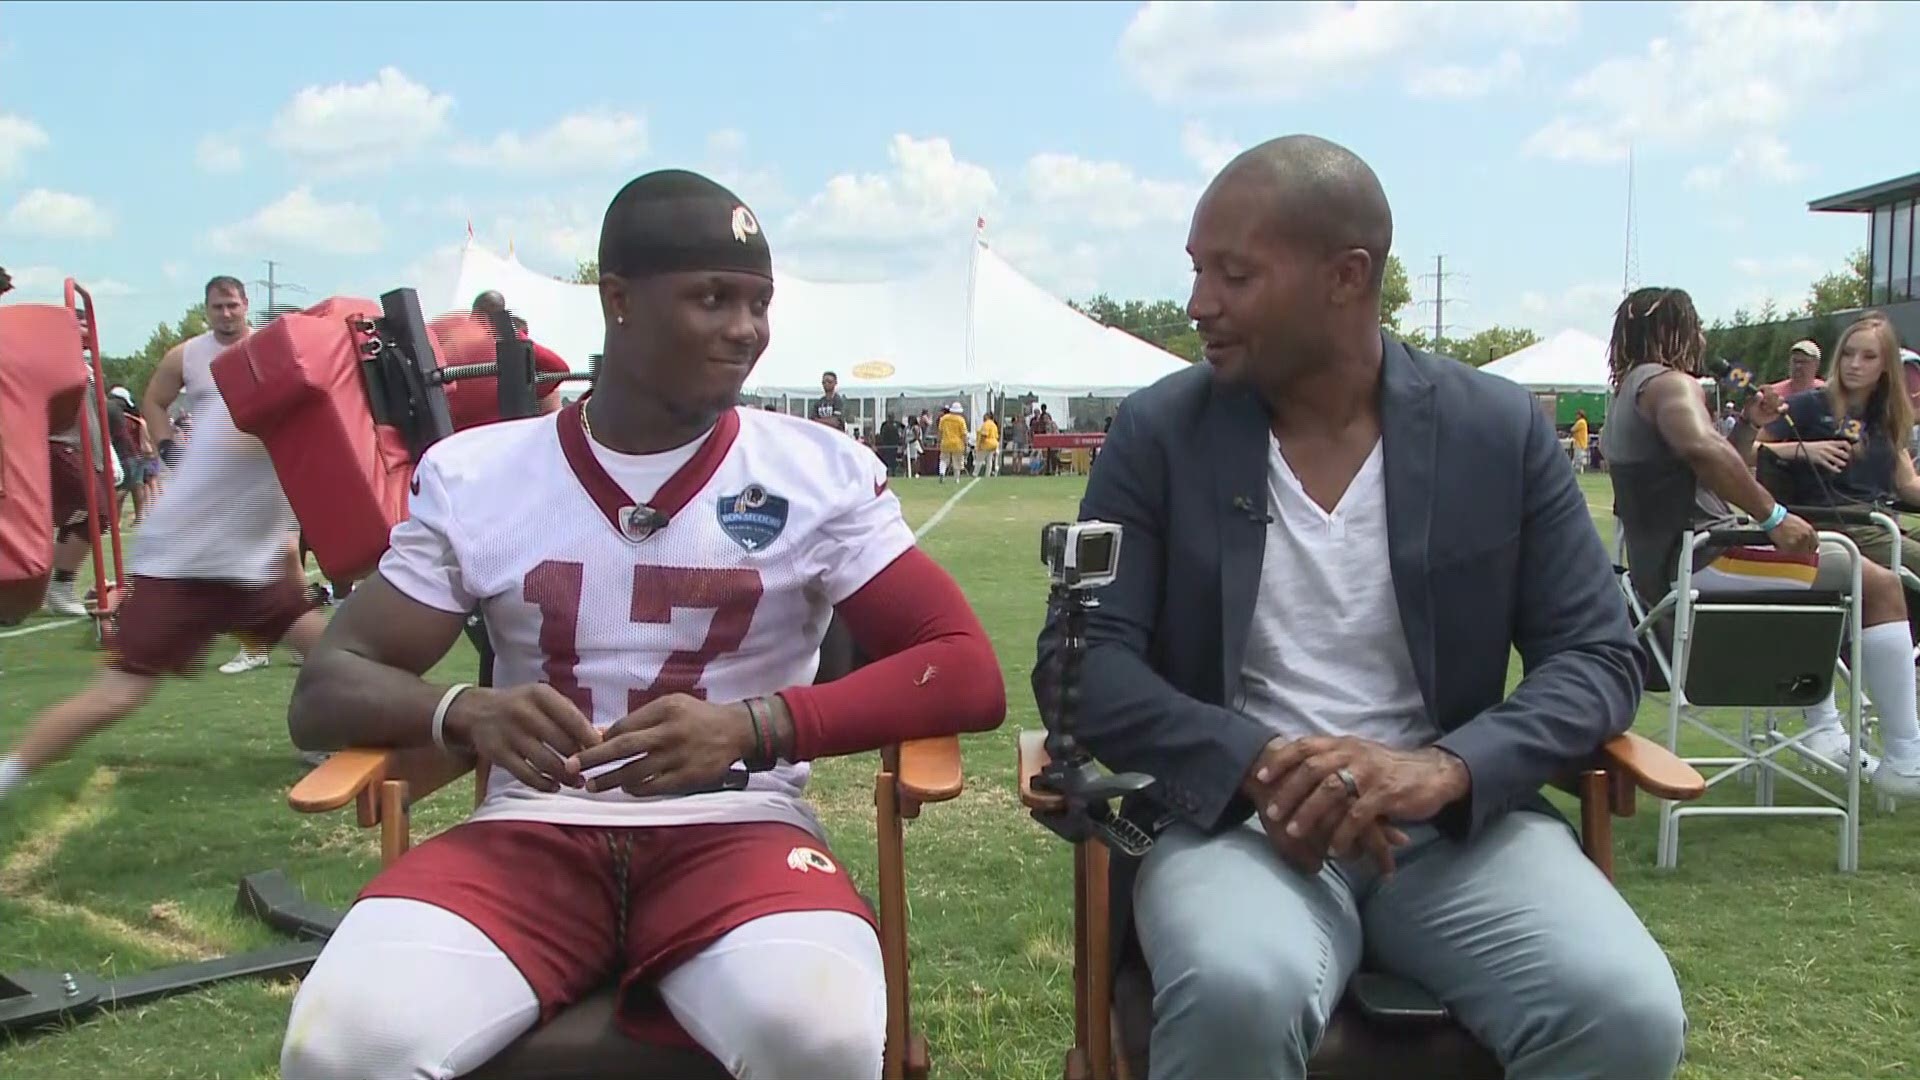 It's Washington Redskins player Terry McLaurin's first training camp. He sits down with Darren Haynes to discuss the upcoming season.